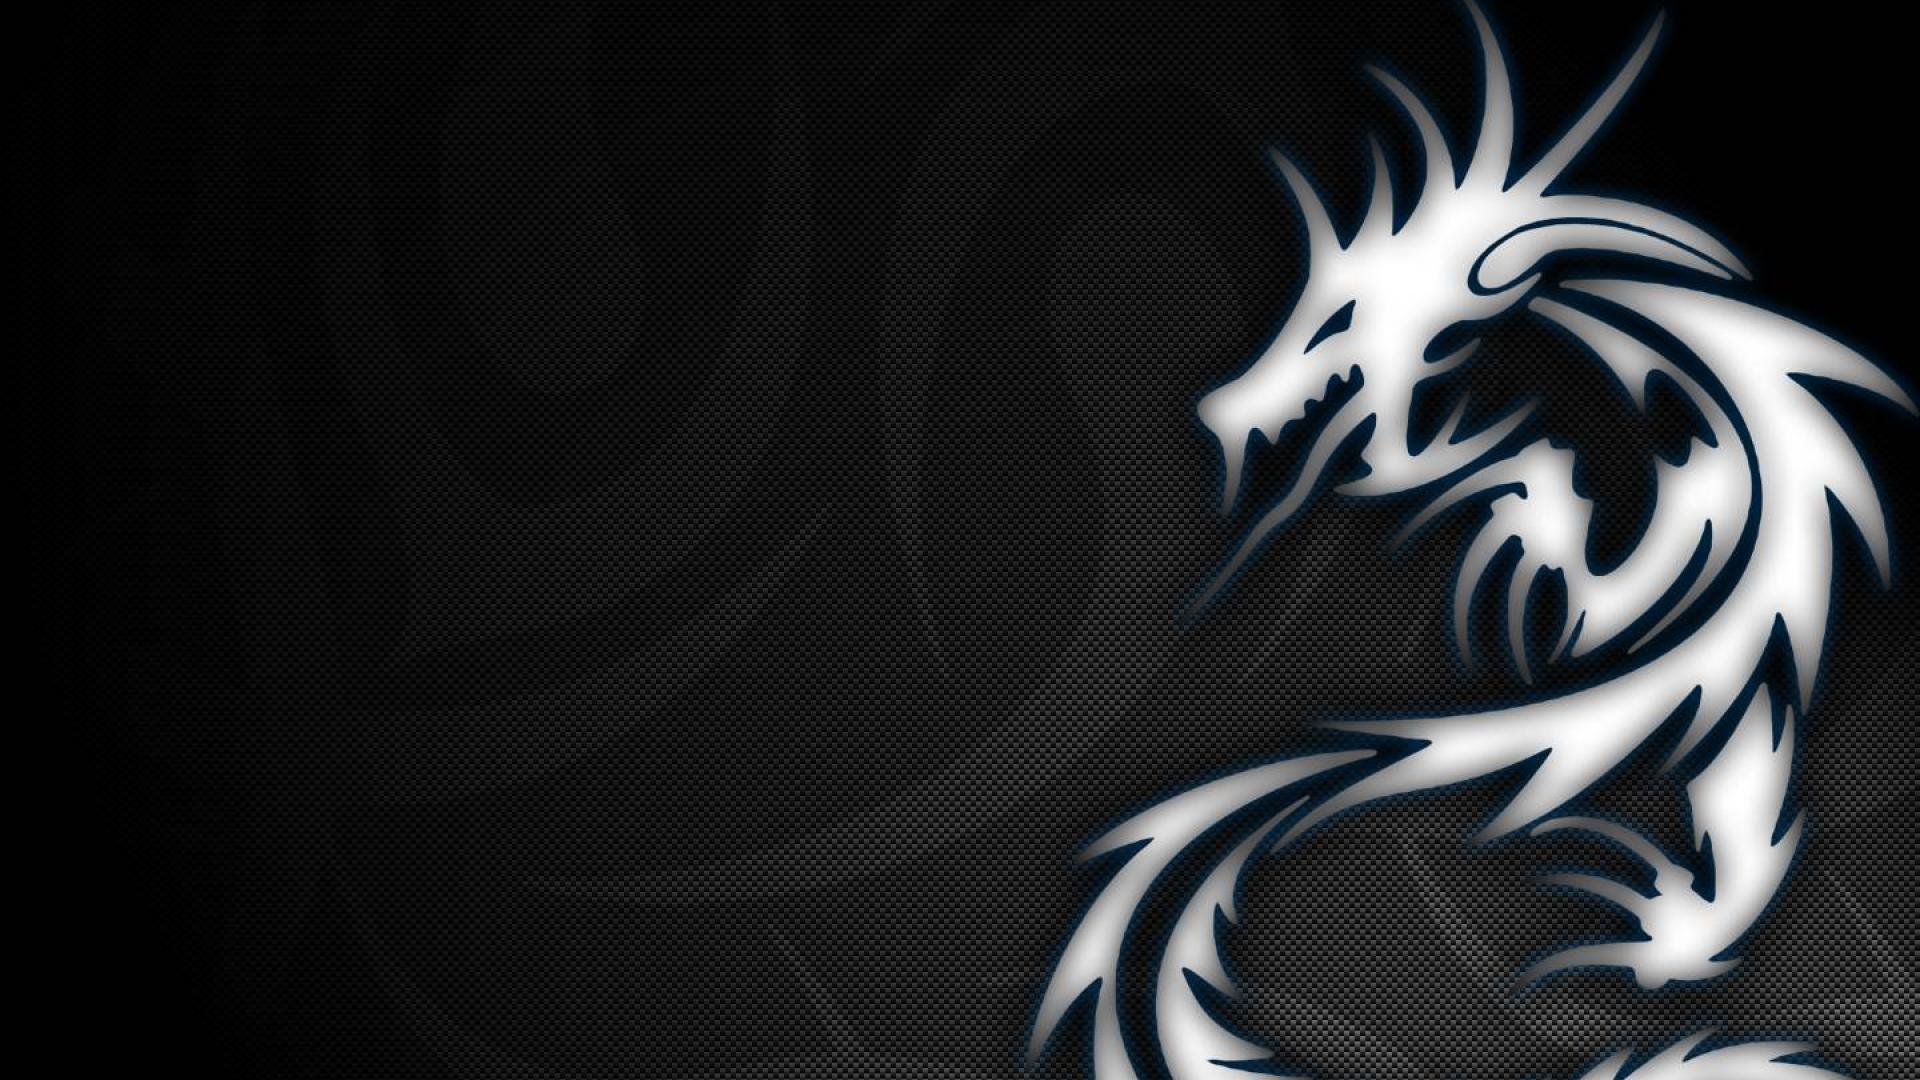 Sign dragon wallpaper - (#19294) - High Quality and Resolution ...